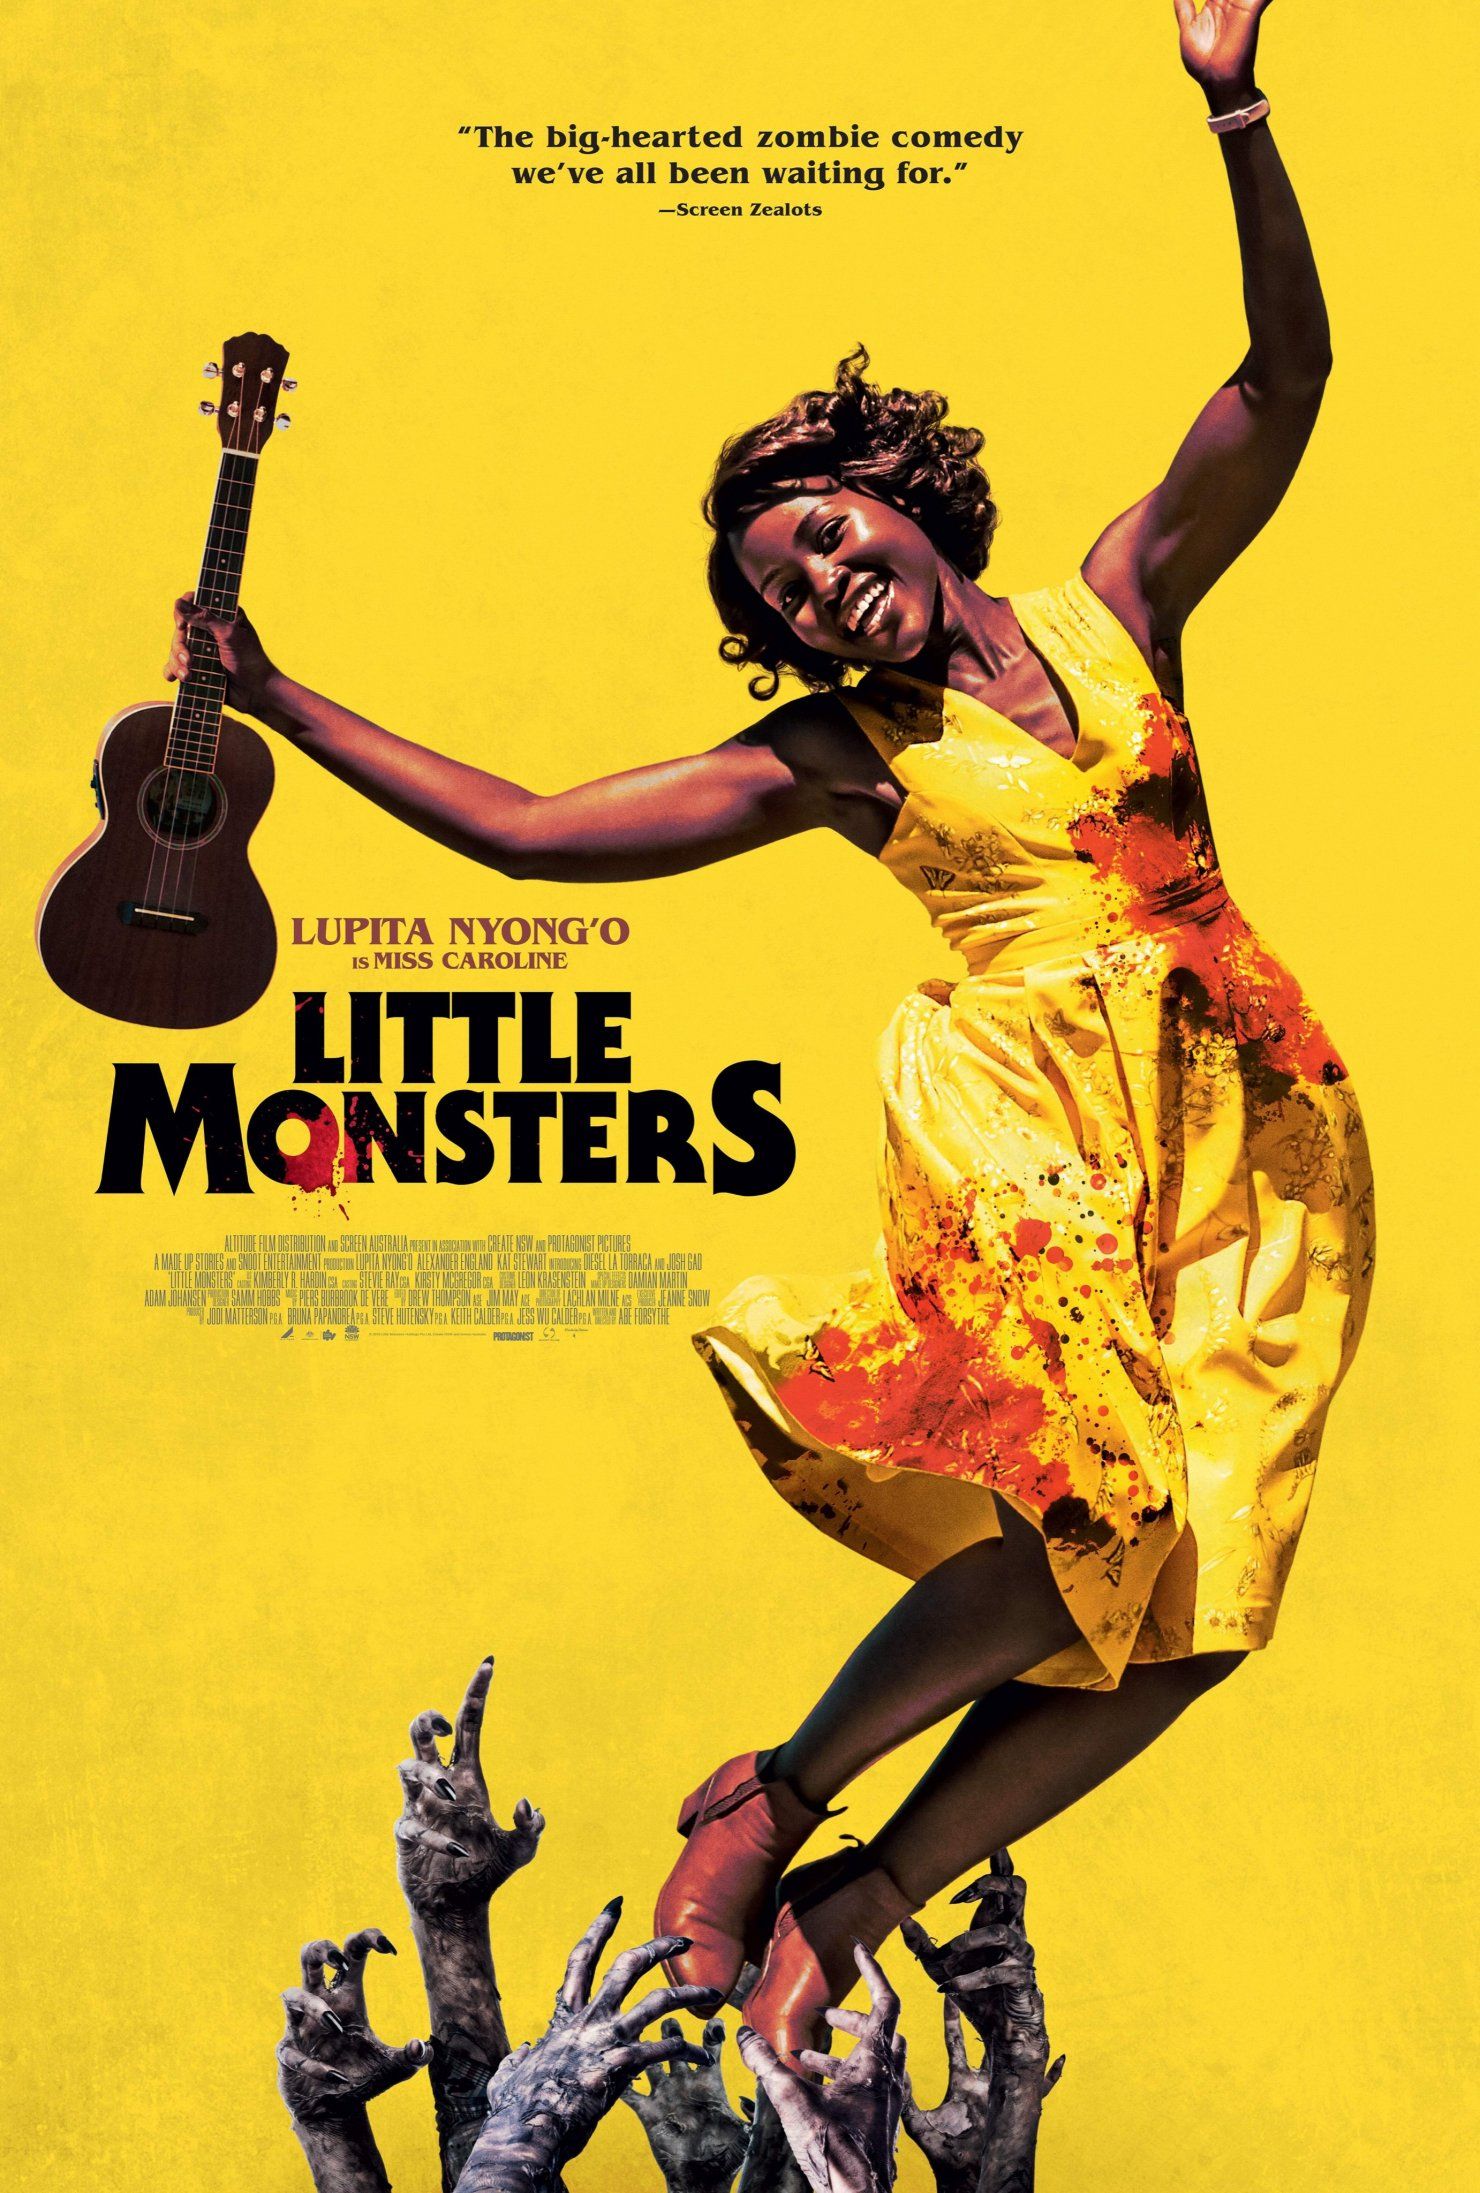 Little Monsters Movie Trailer Lupita Nyong’o Battles Zombies